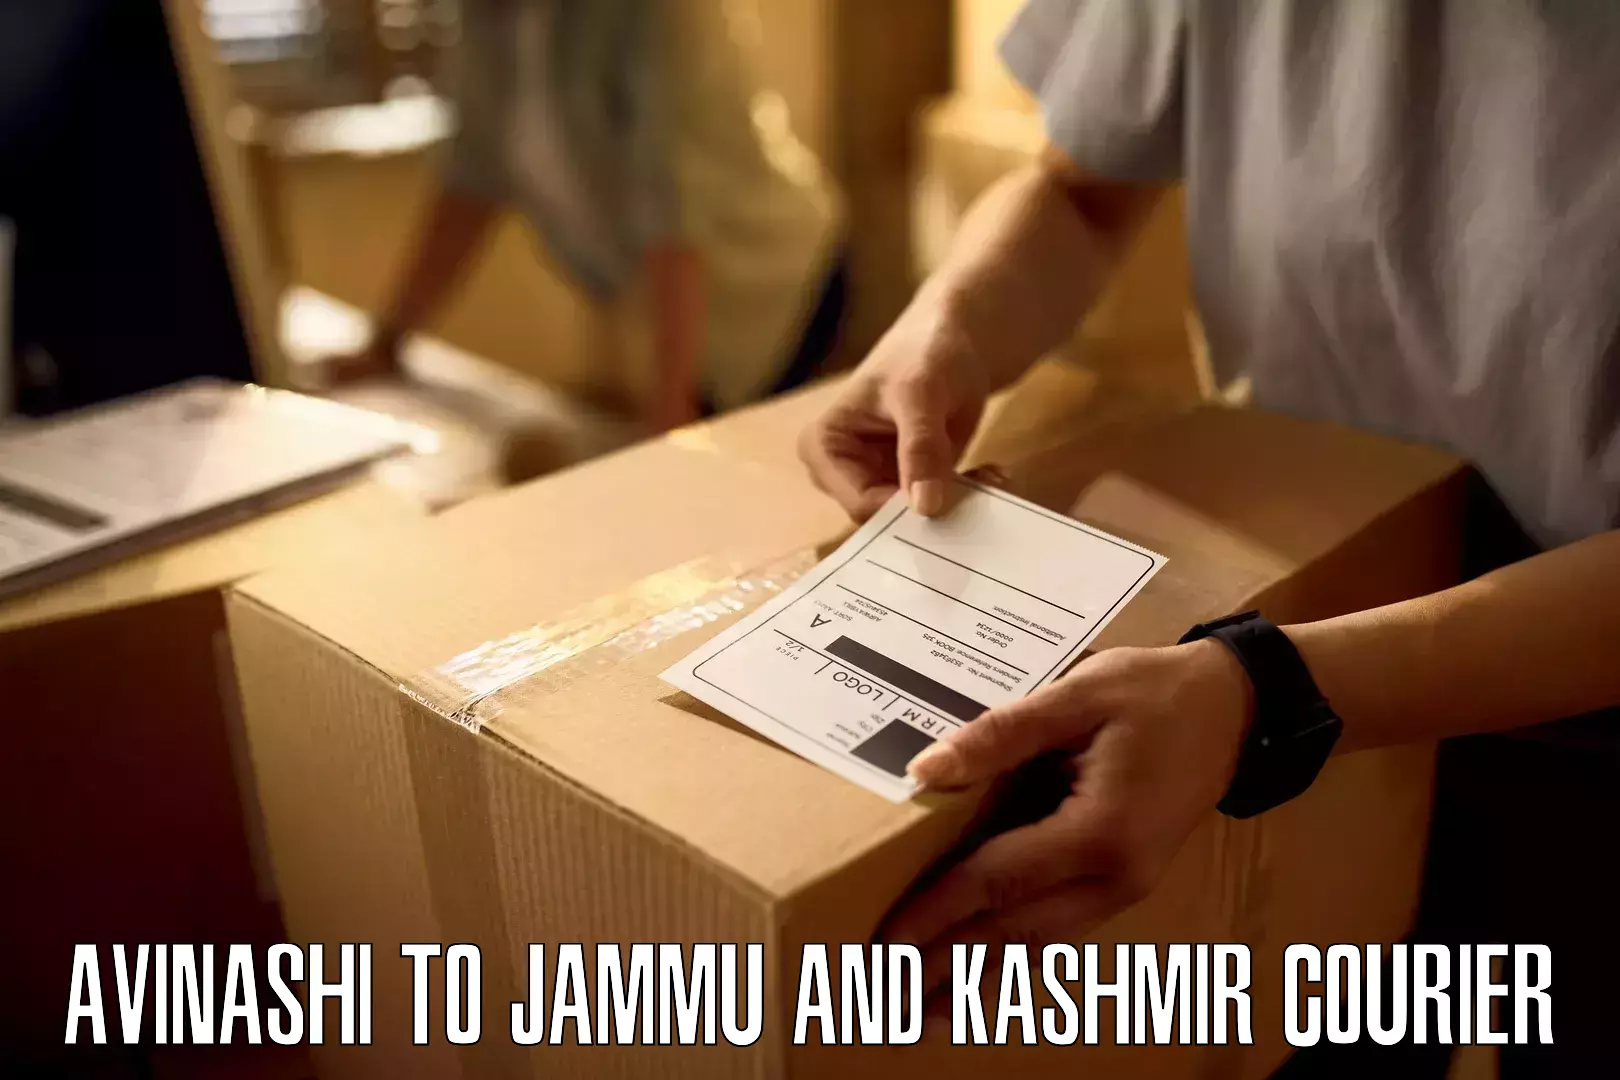 User-friendly delivery service Avinashi to Pulwama